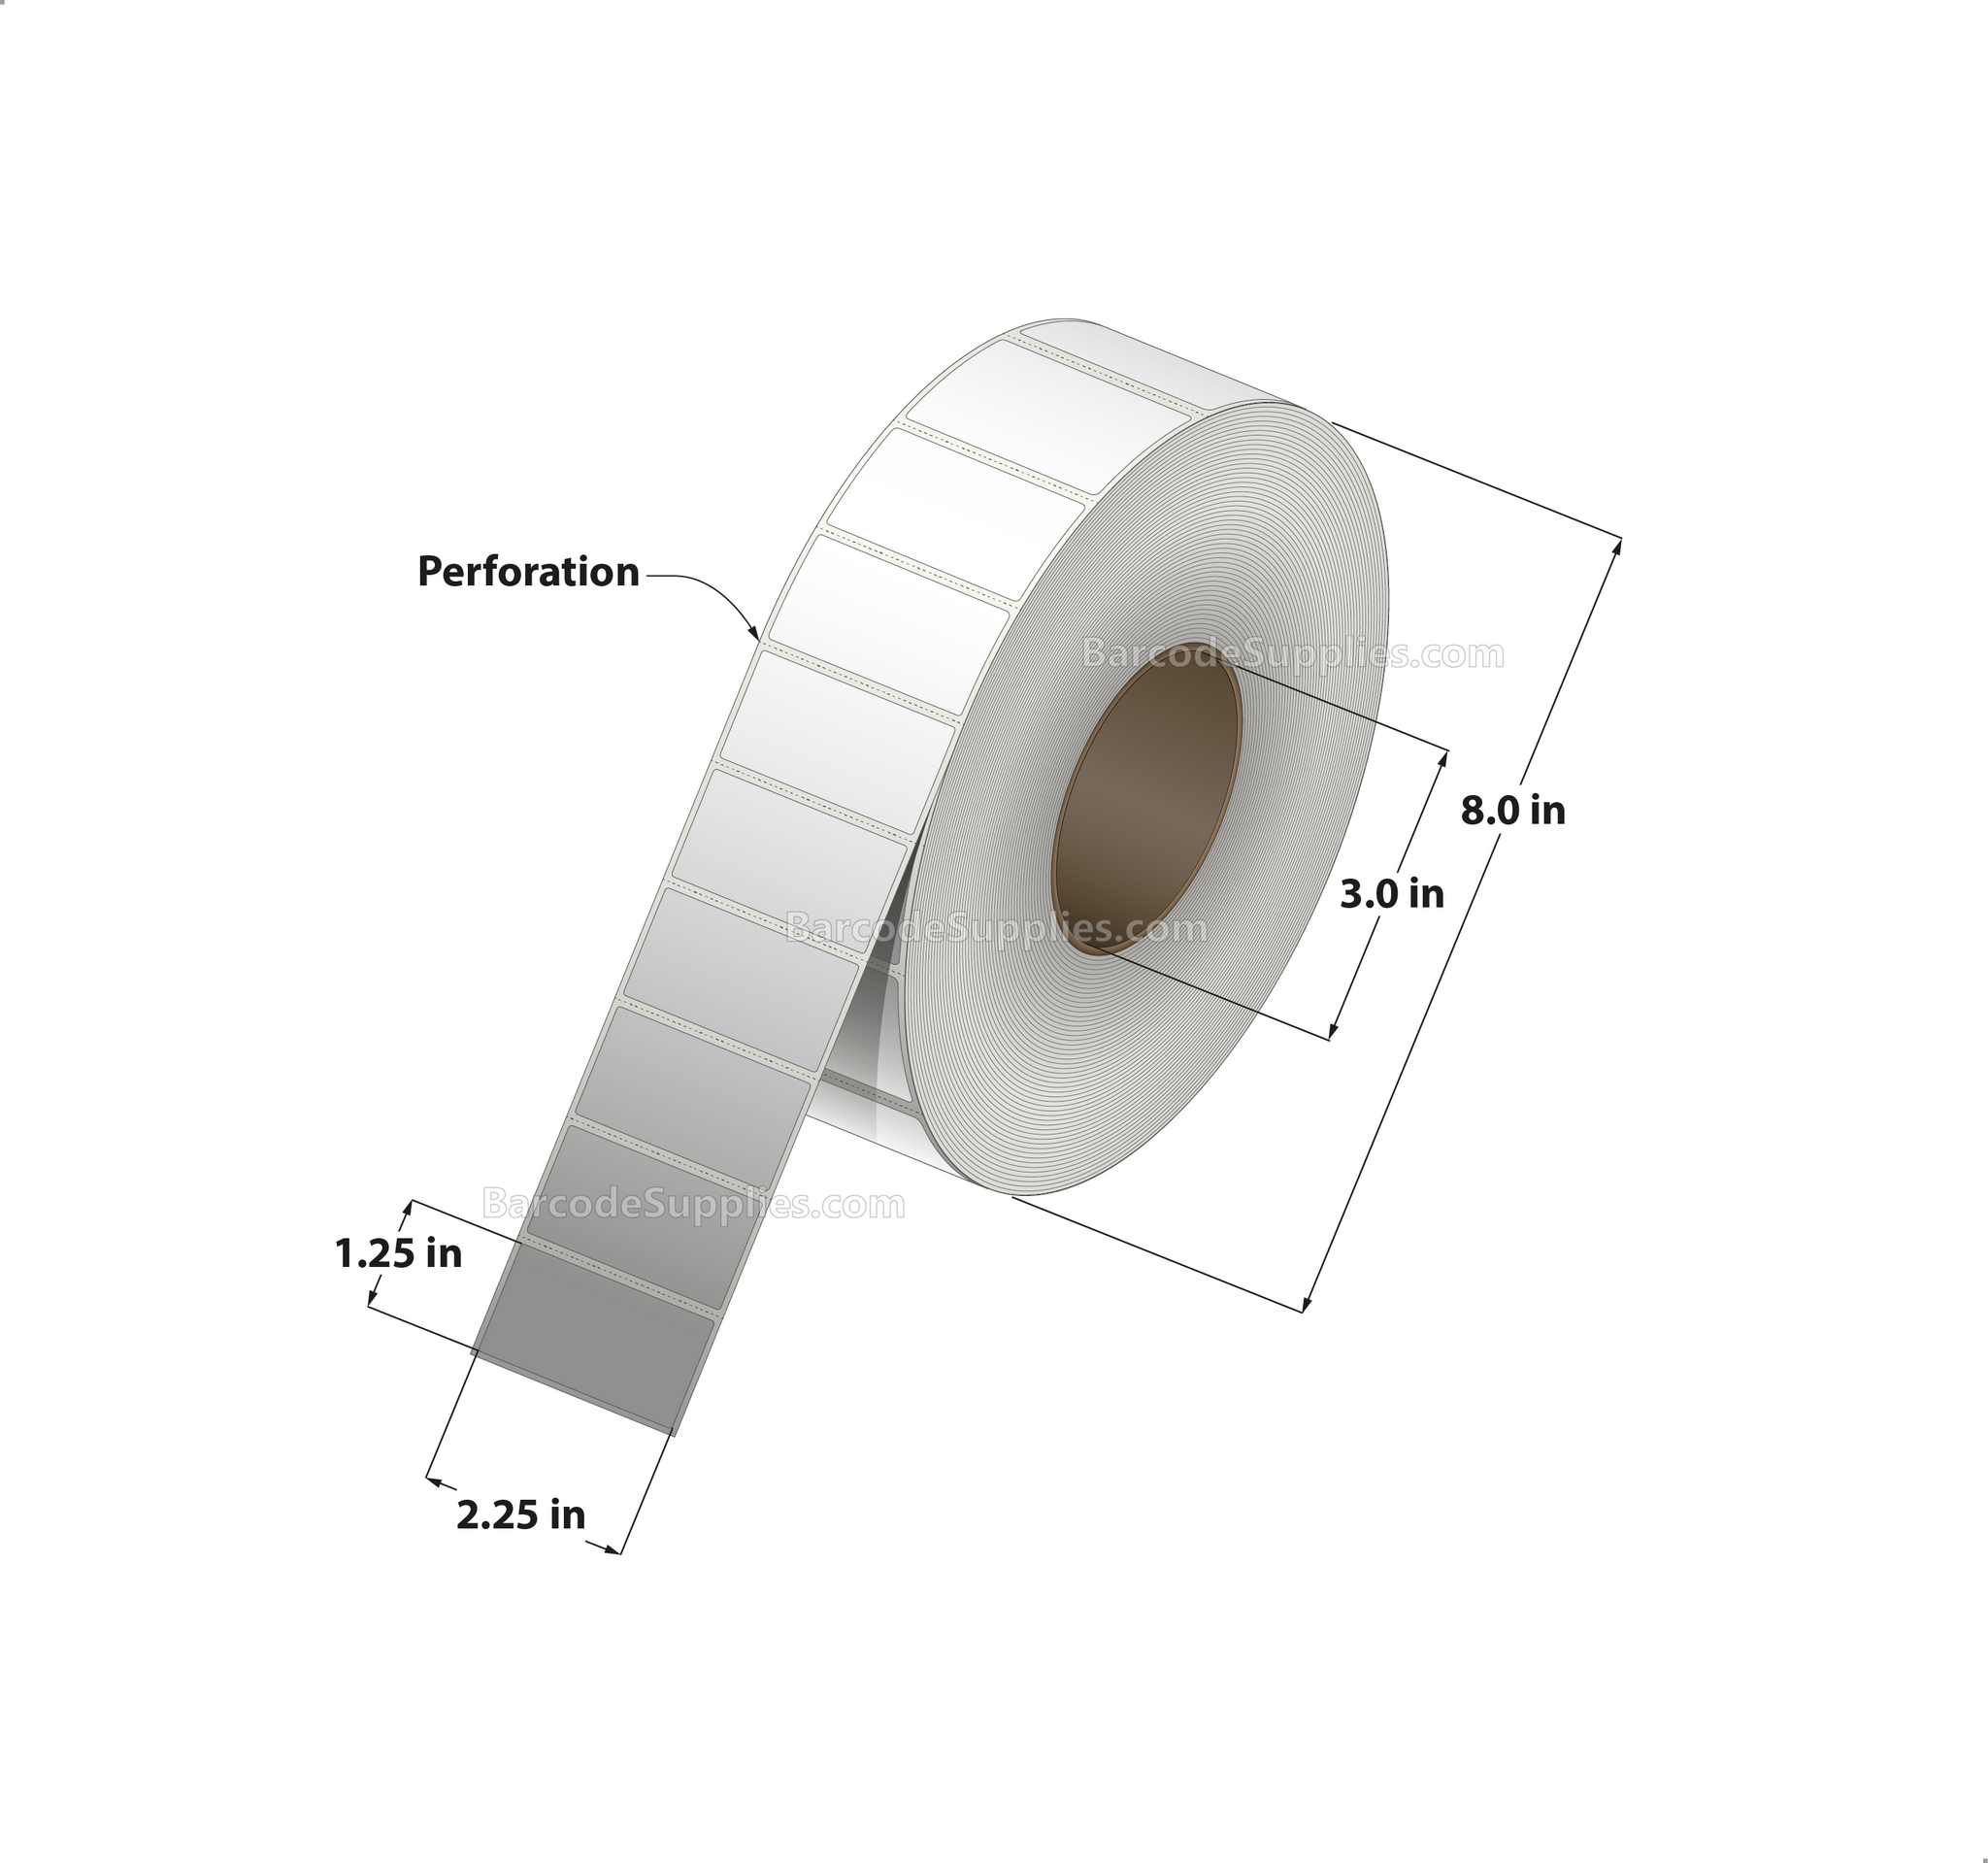 2.25 x 1.25 Thermal Transfer White Labels With Permanent Adhesive - Perforated - 4450 Labels Per Roll - Carton Of 8 Rolls - 35600 Labels Total - MPN: RT-225-125-4450-3